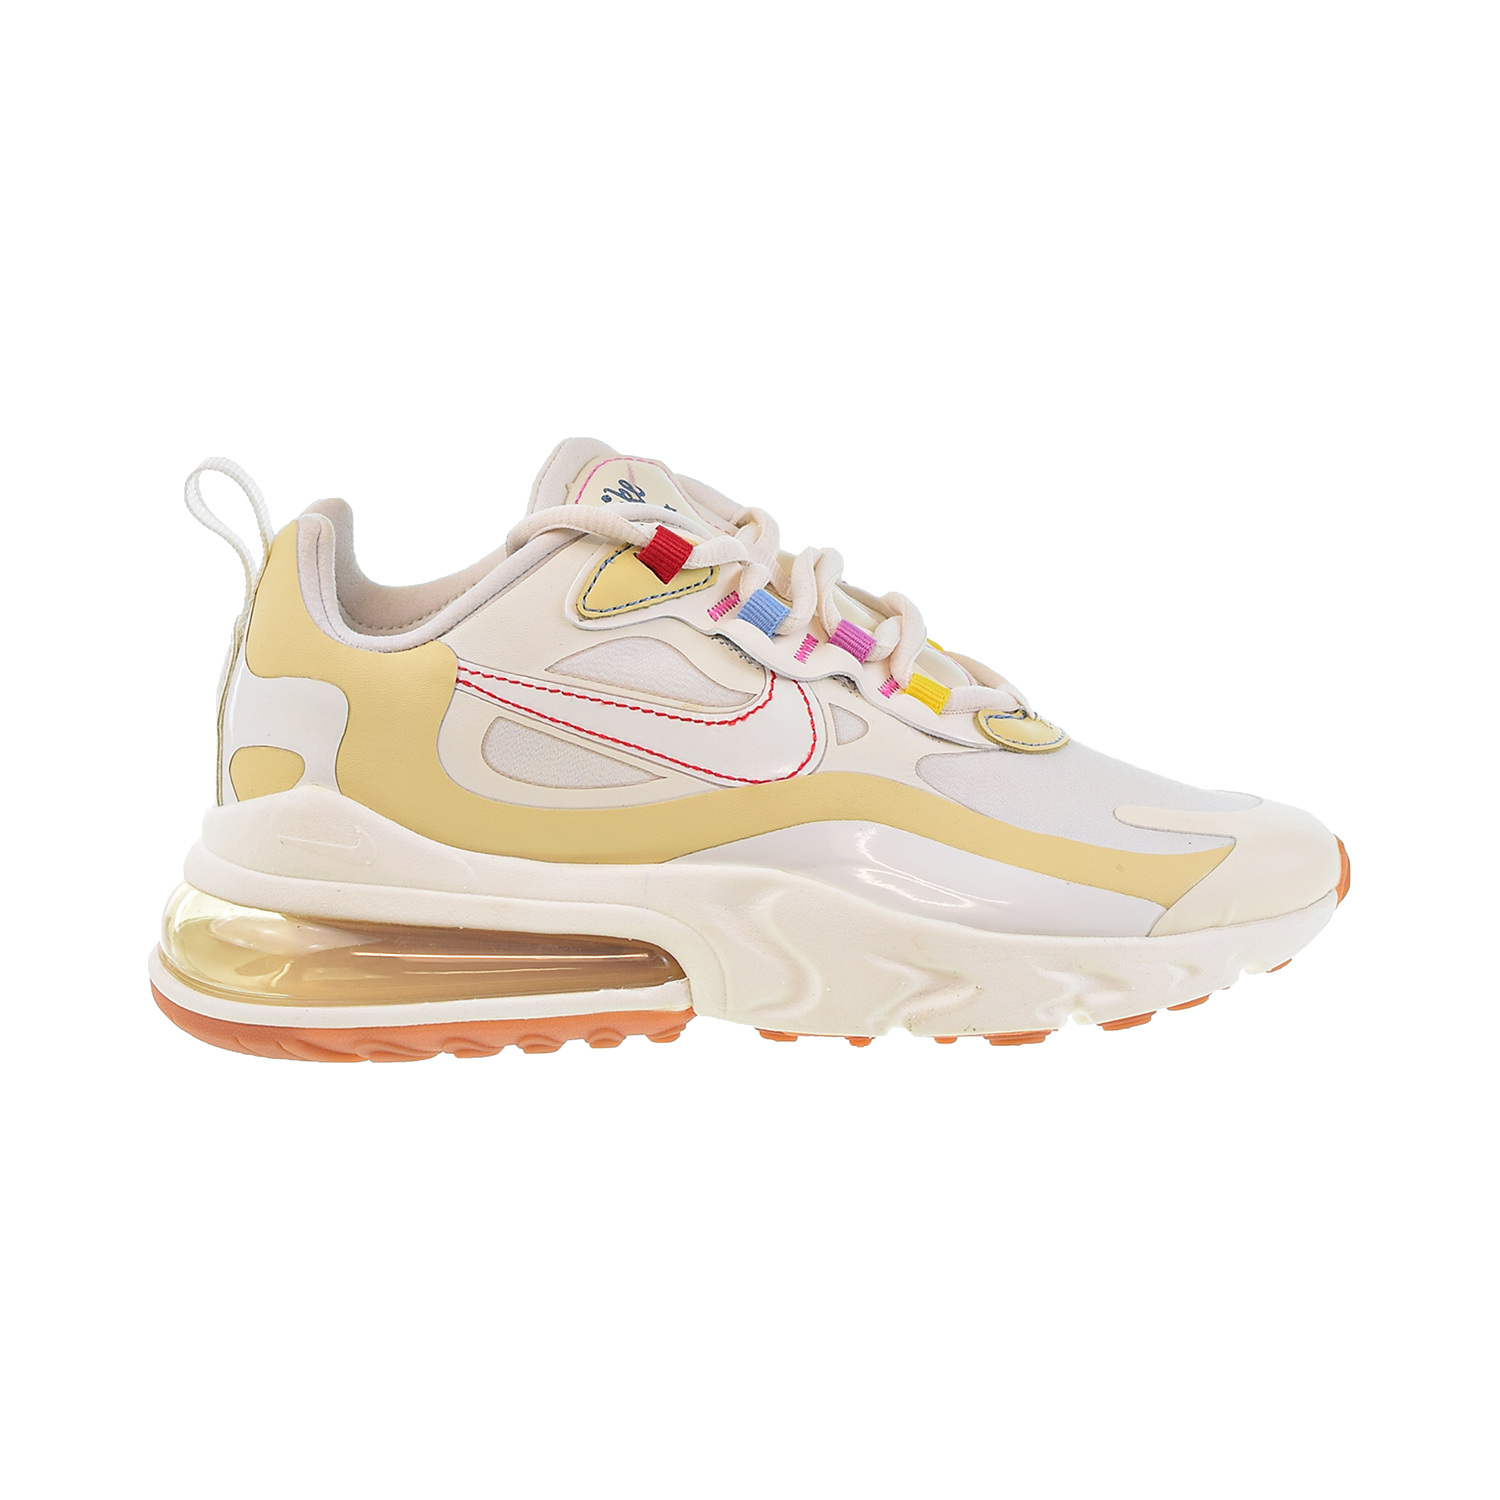 Nike Air Max 270 React Women's Shoes Pale Ivory-Sail-Pale Vanilla cq0208-101 - image 1 of 6